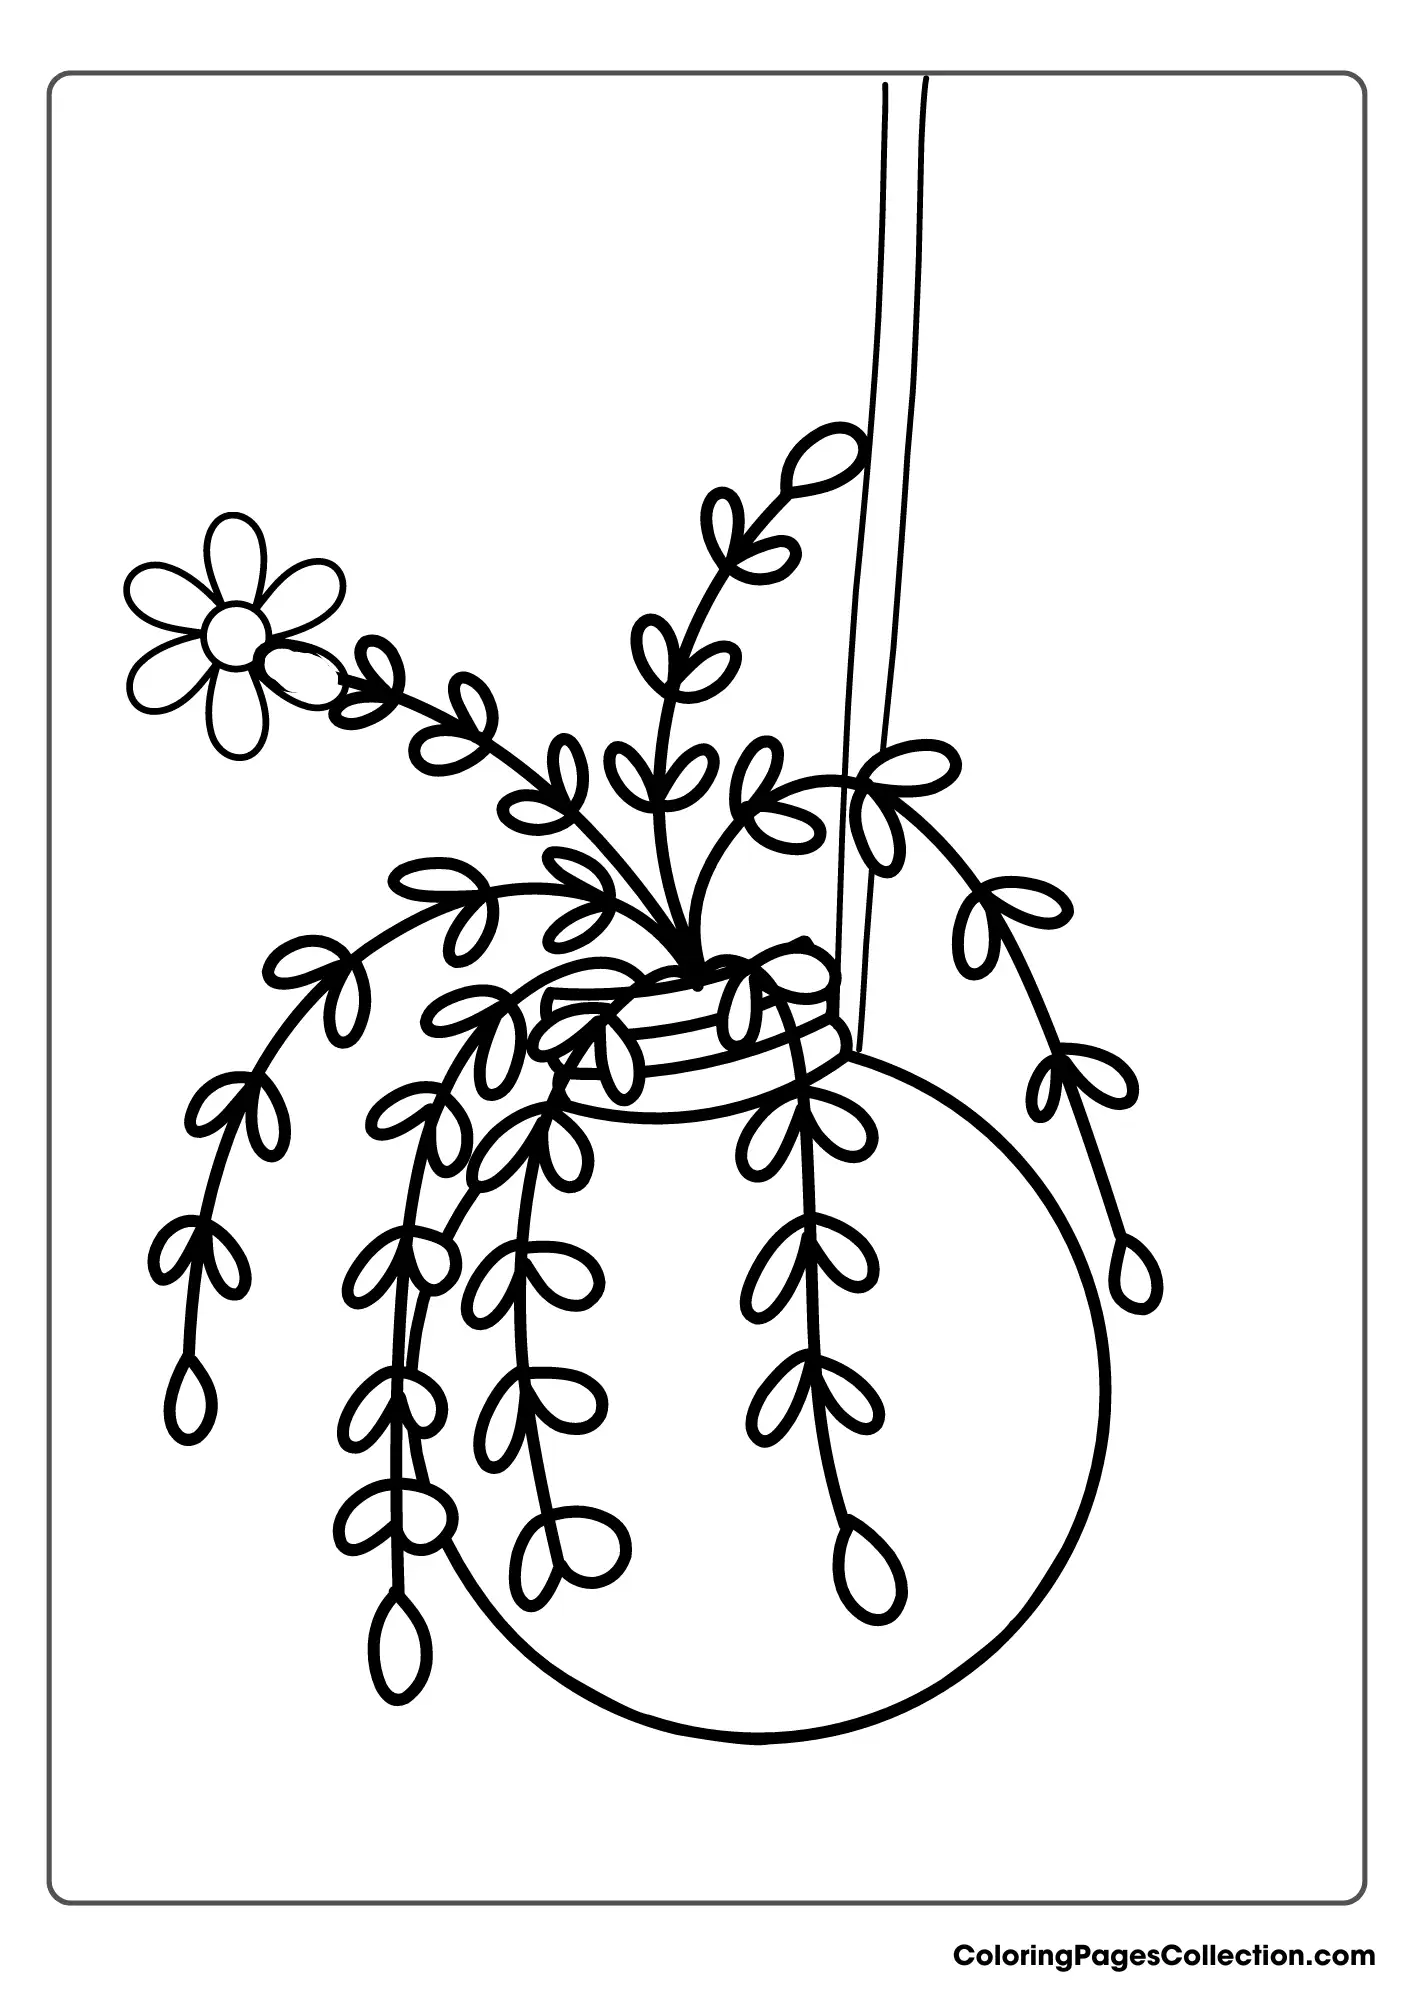 A Coloring Page Of A Plant In A Vase